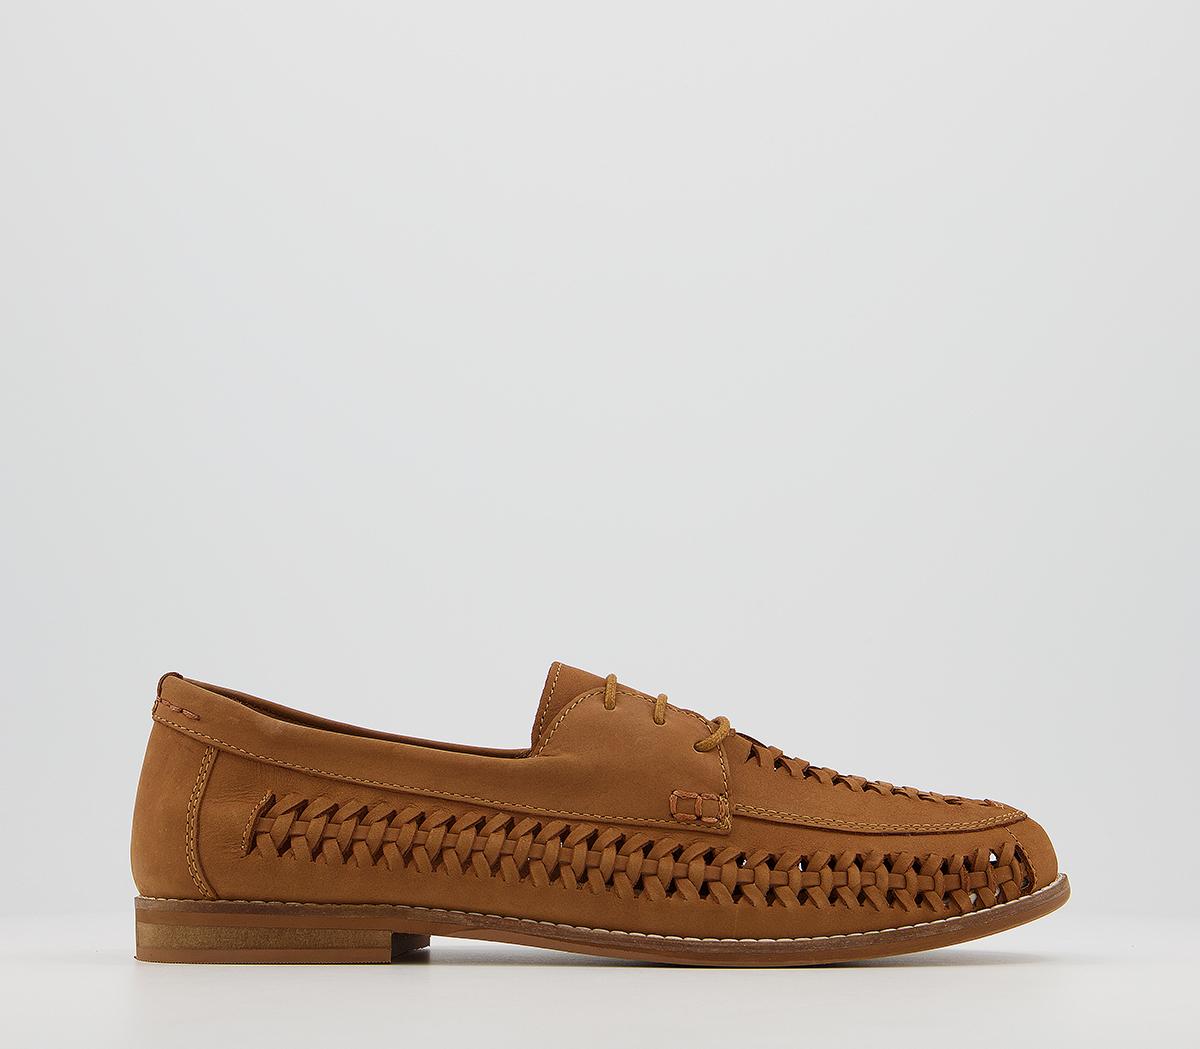 OFFICECamberwell Lace Up Woven DerbyTan Suede